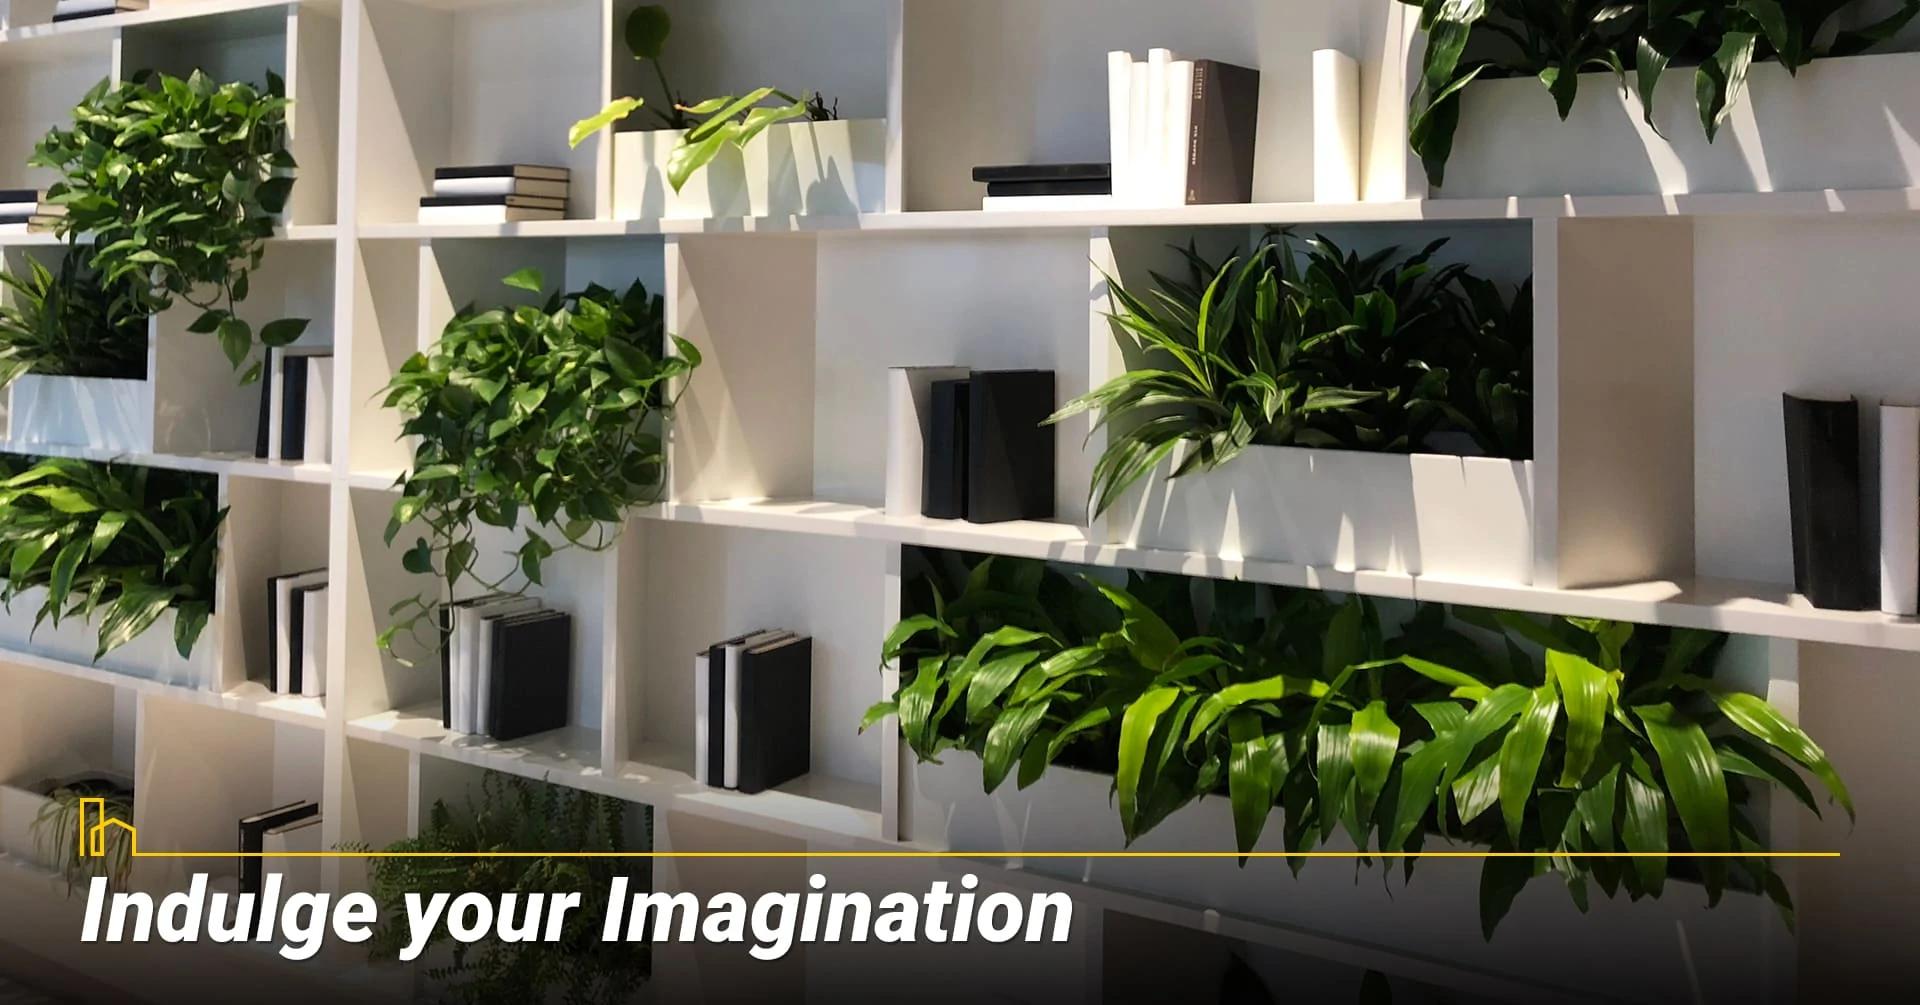 Indulge your Imagination, be creative with your green